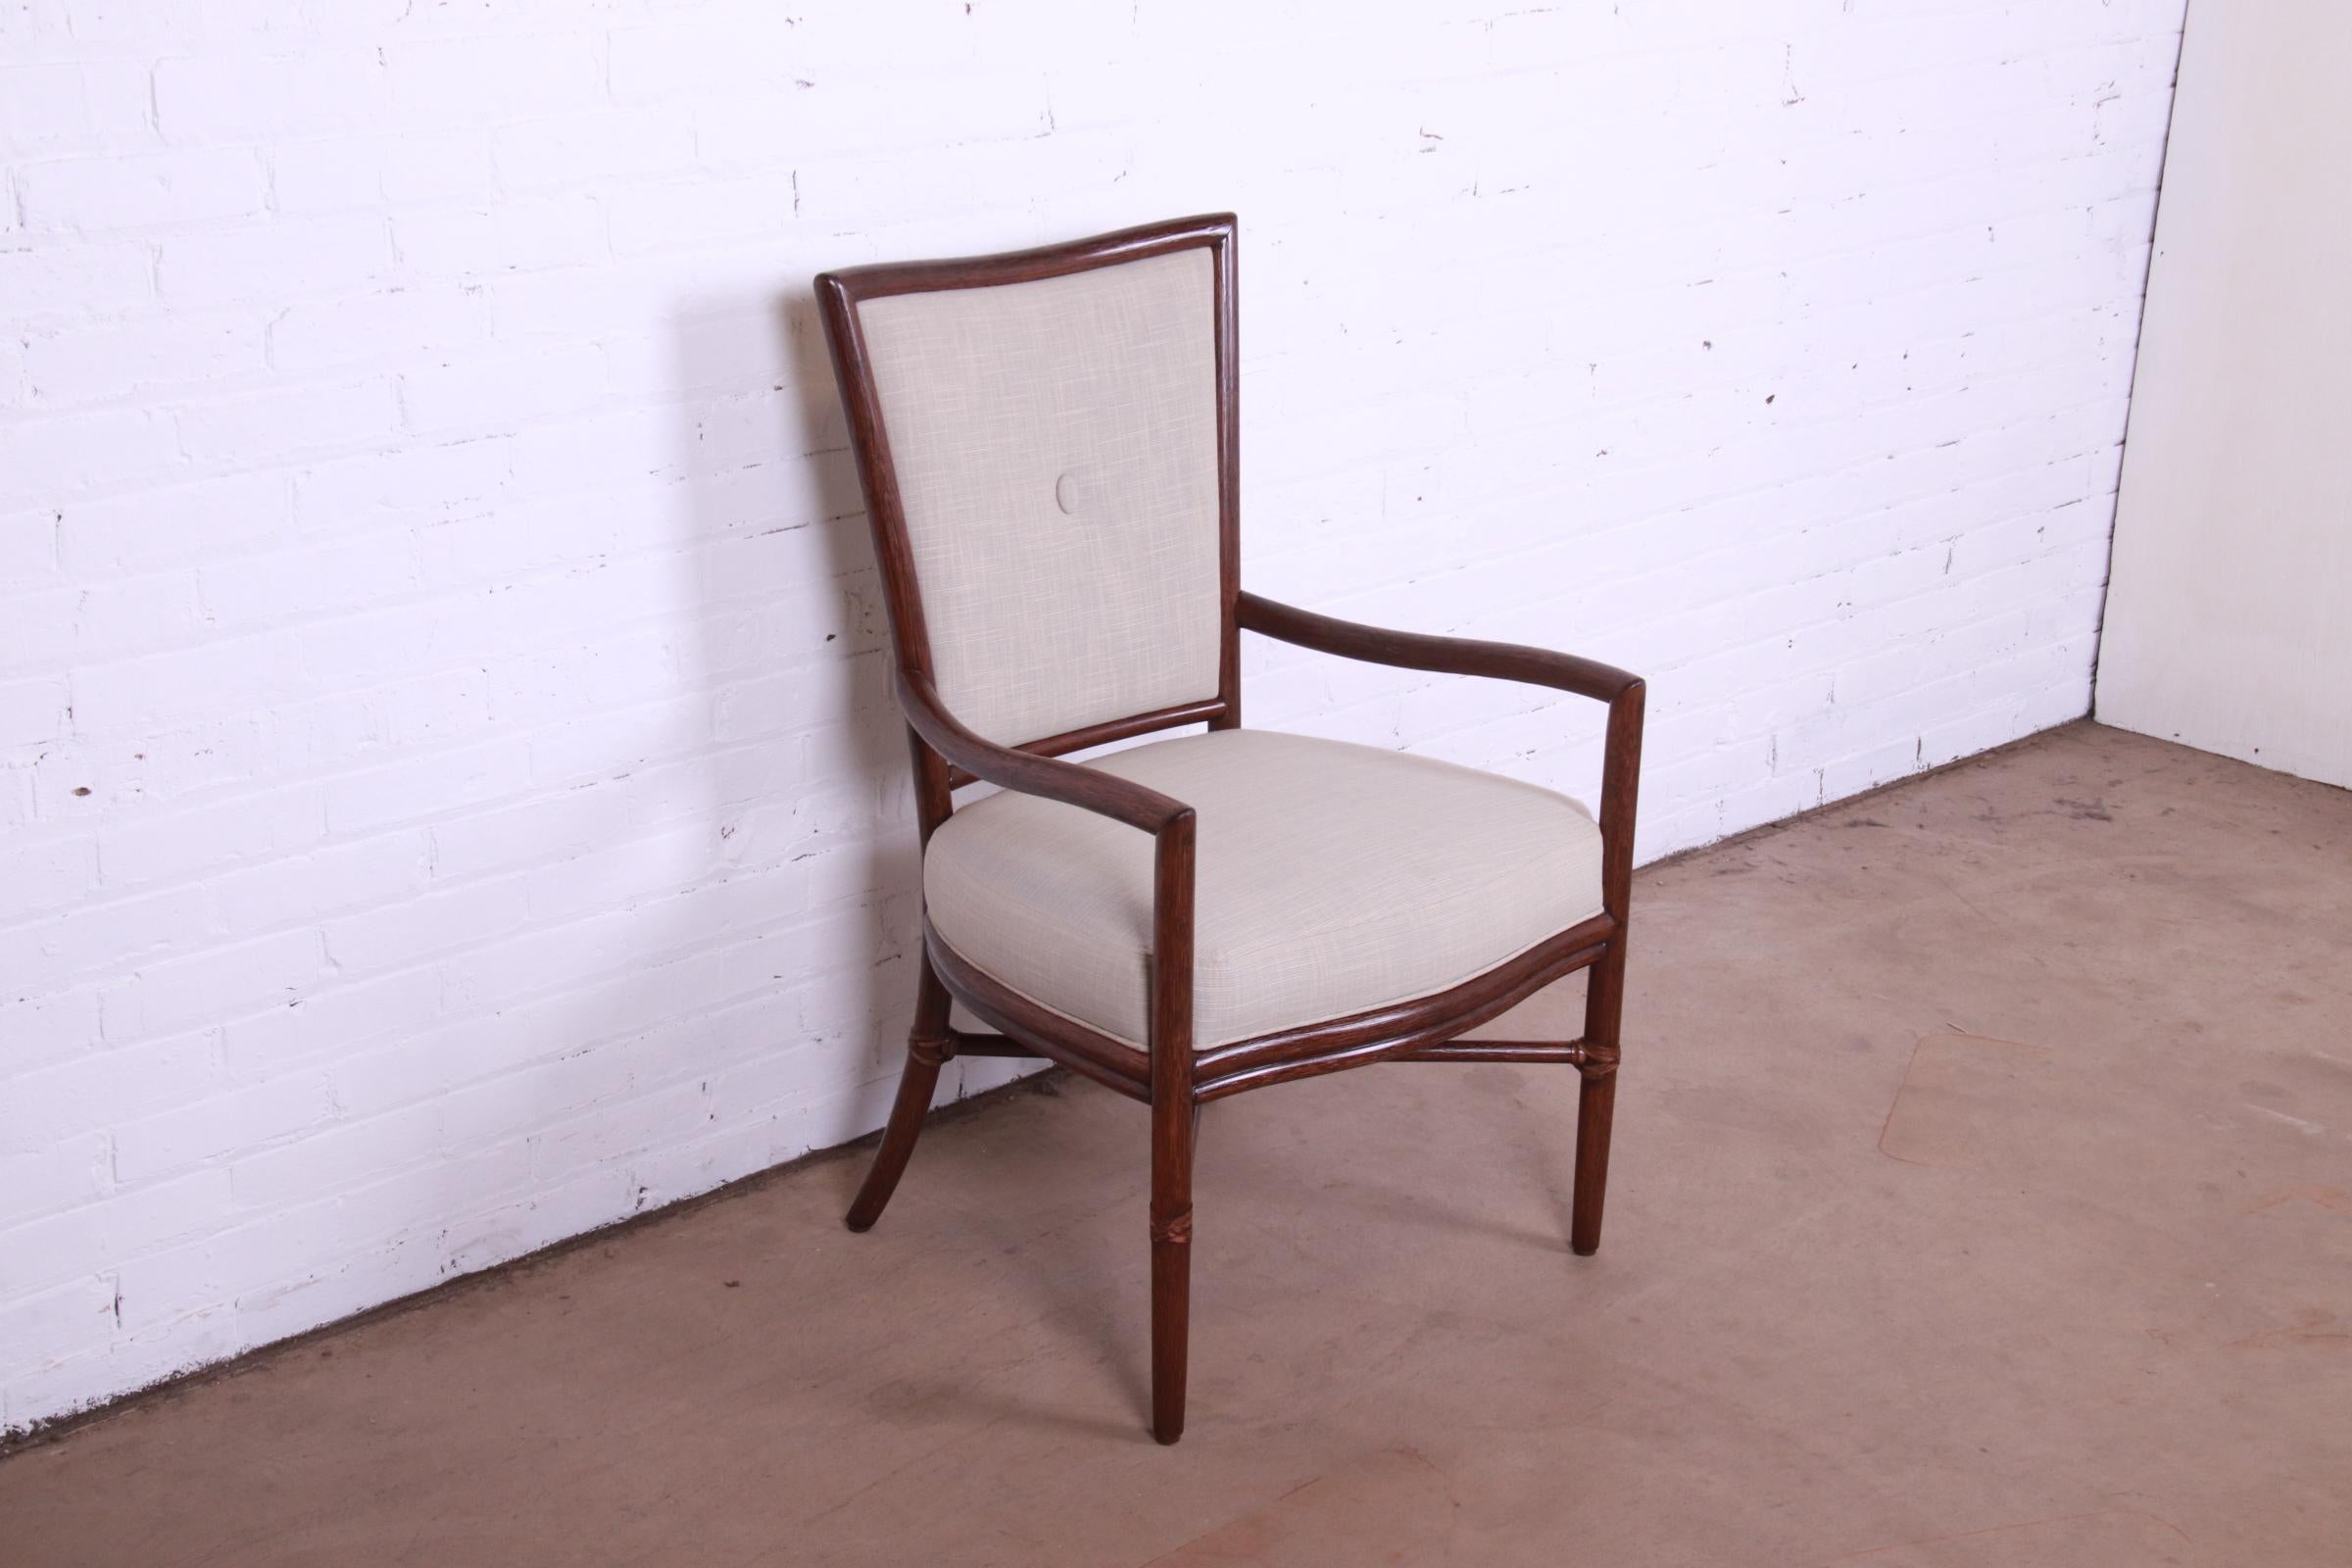 Barbara Barry for McGuire Hollywood Regency Organic Modern Rattan Club Chair In Good Condition For Sale In South Bend, IN